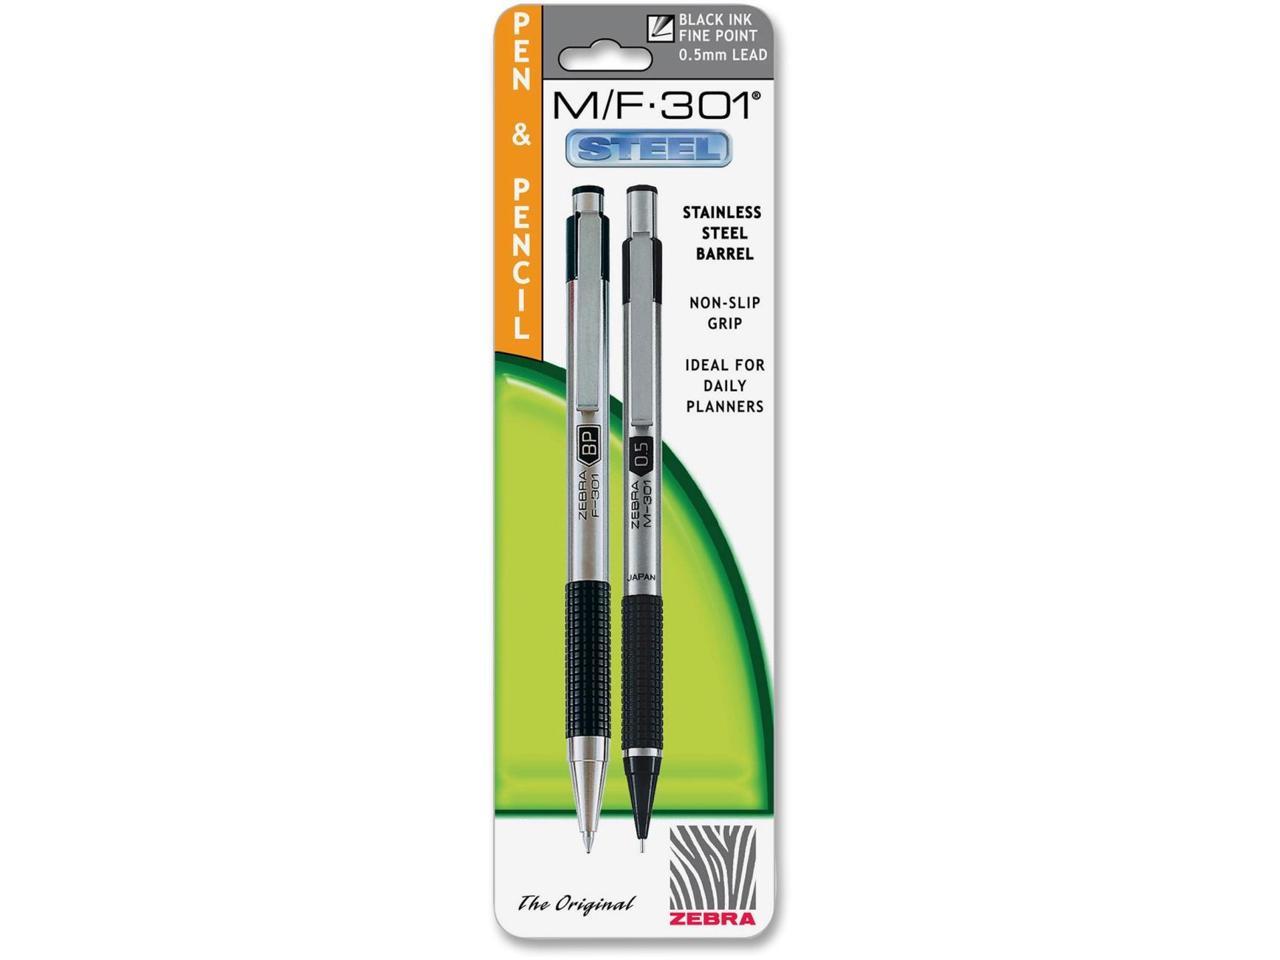 Fine Point 1 0.7mm HB Lead and 0.8mm Black Ink Mechanical Pencil and Ballpoint Pen M/F 701 Stainless Steel and Ballpoint Pen Set 